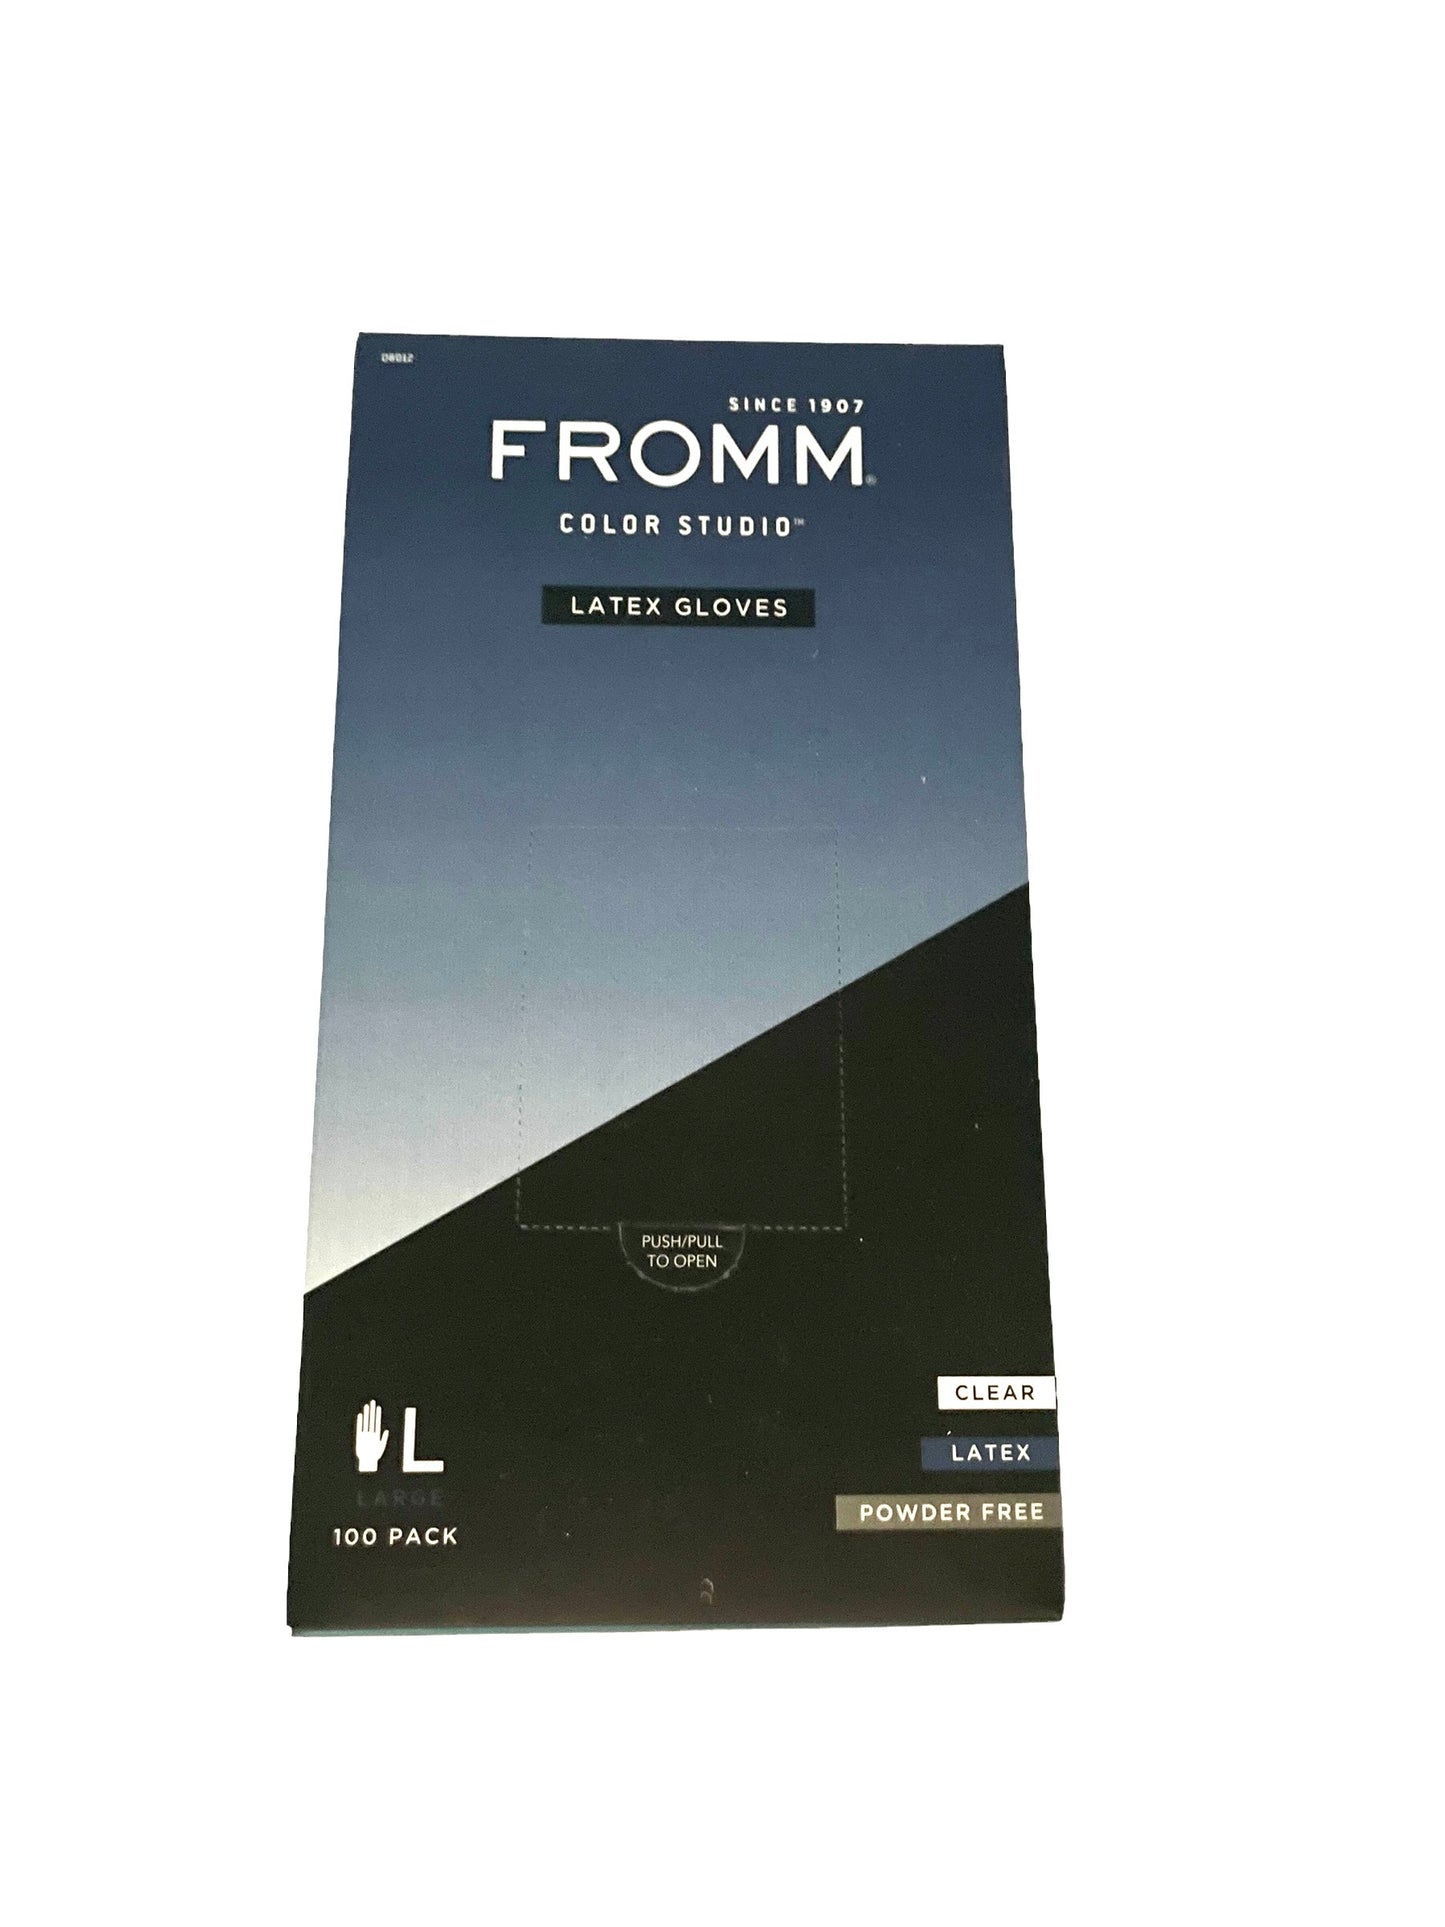 Disposable Gloves Fromm Latex Powder Free Clear Large Gloves 100 pk Latex Gloves